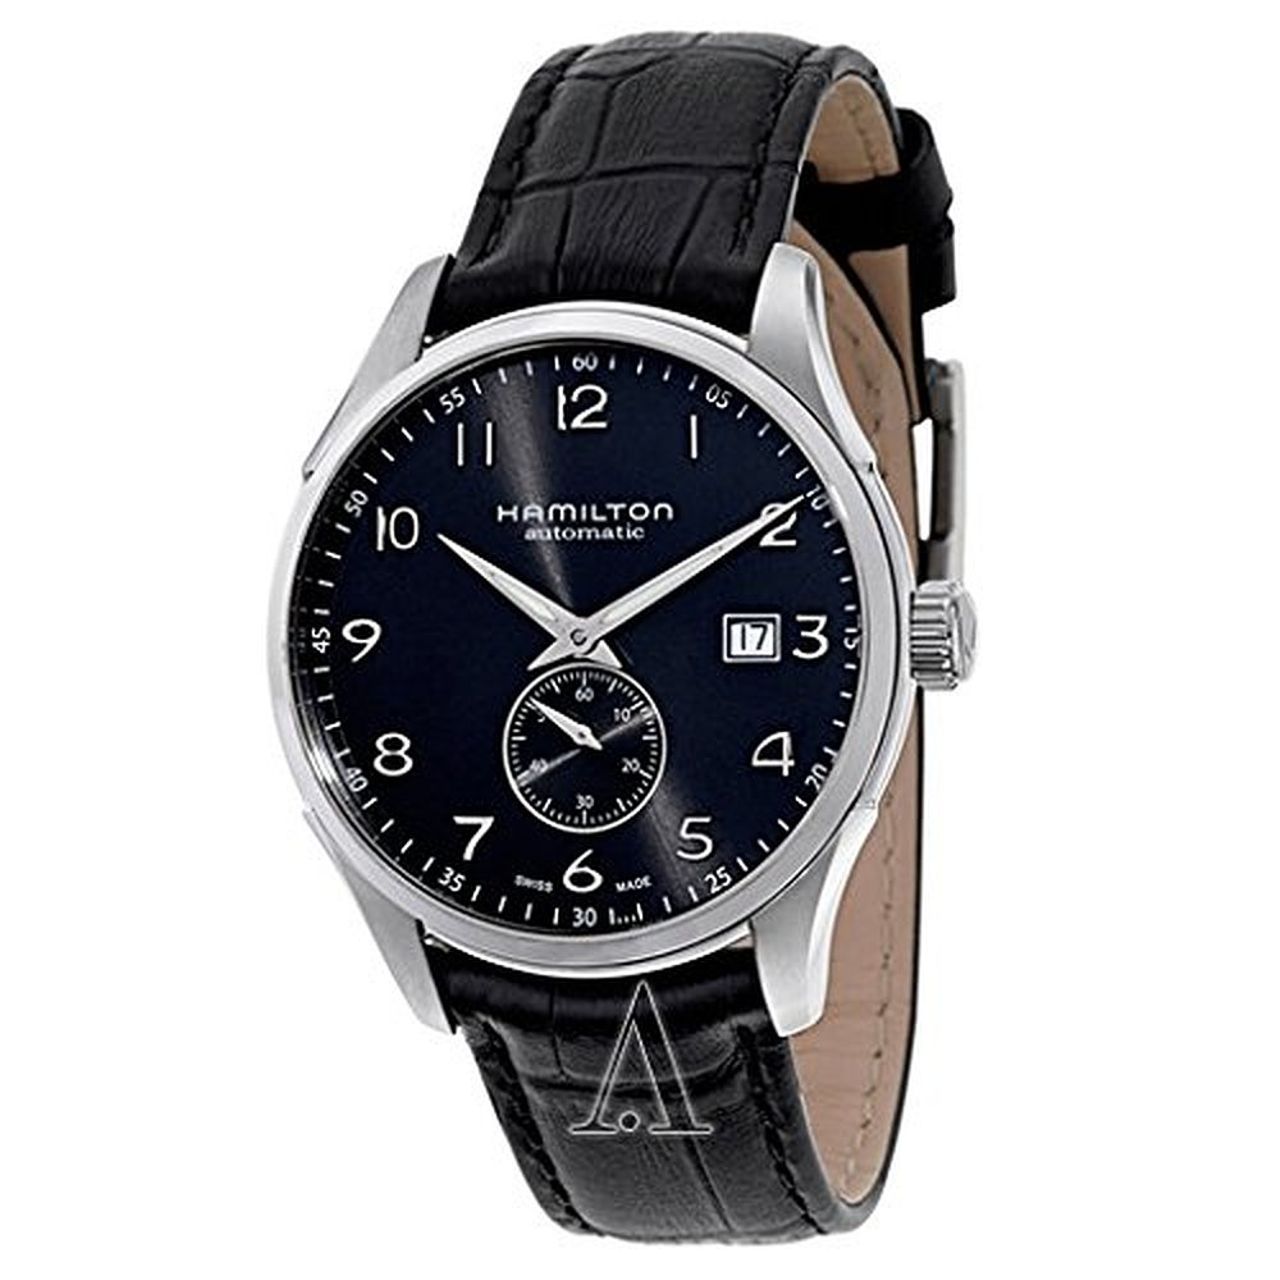 Hamilton H42515735 Mens Black Dial Analog Automatic Watch with Leather Strap